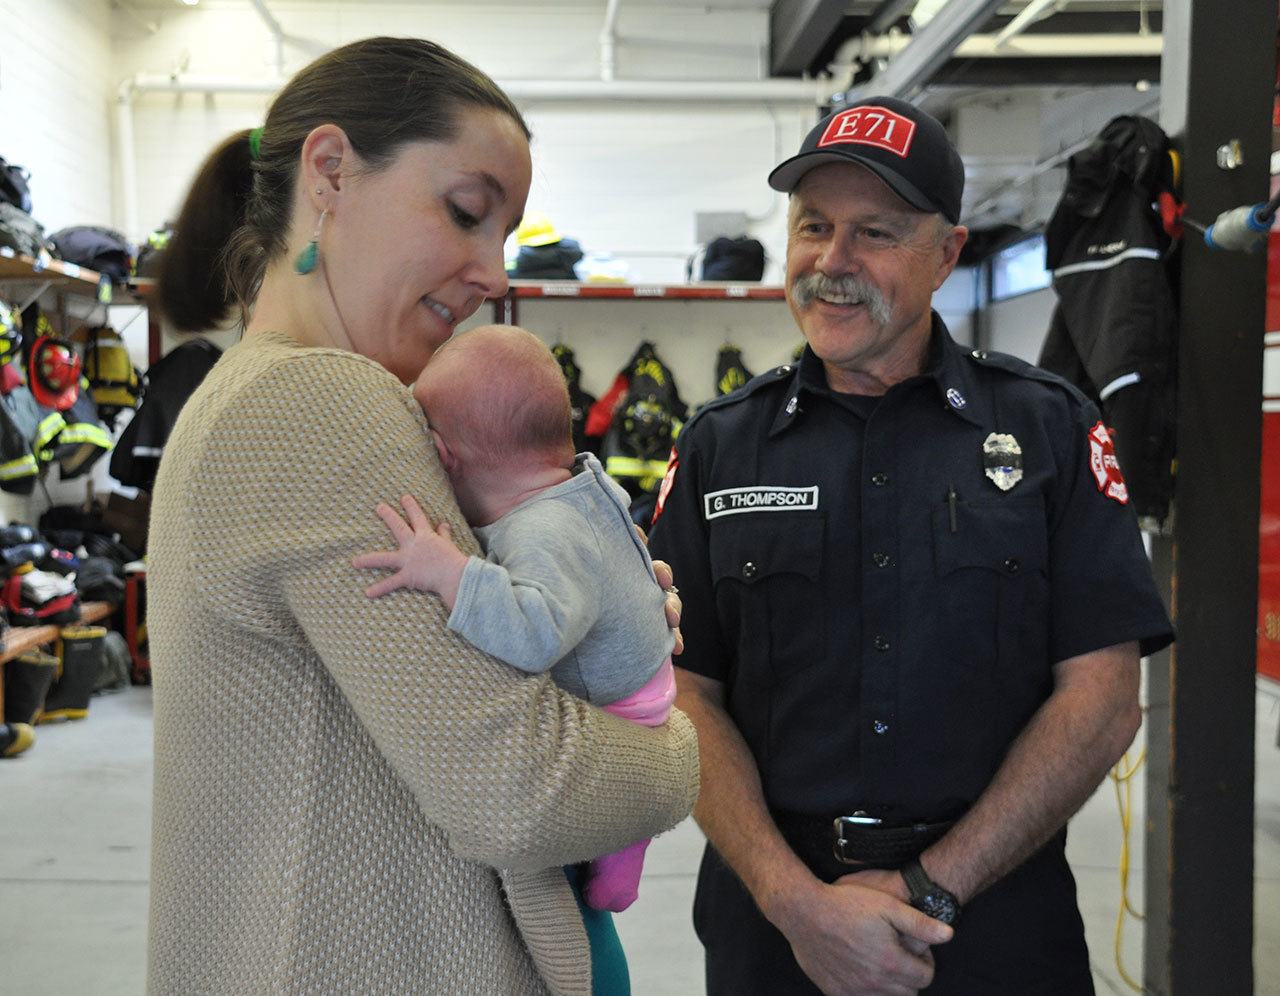 Kelley Lowery holds her 1-month-old daughter, Mia, while visiting with Puget Sound Fire Capt. Guy Thompson who delivered Mia at Fire Station 77 on Dec. 21. HEIDI SANDERS, Kent Reporter